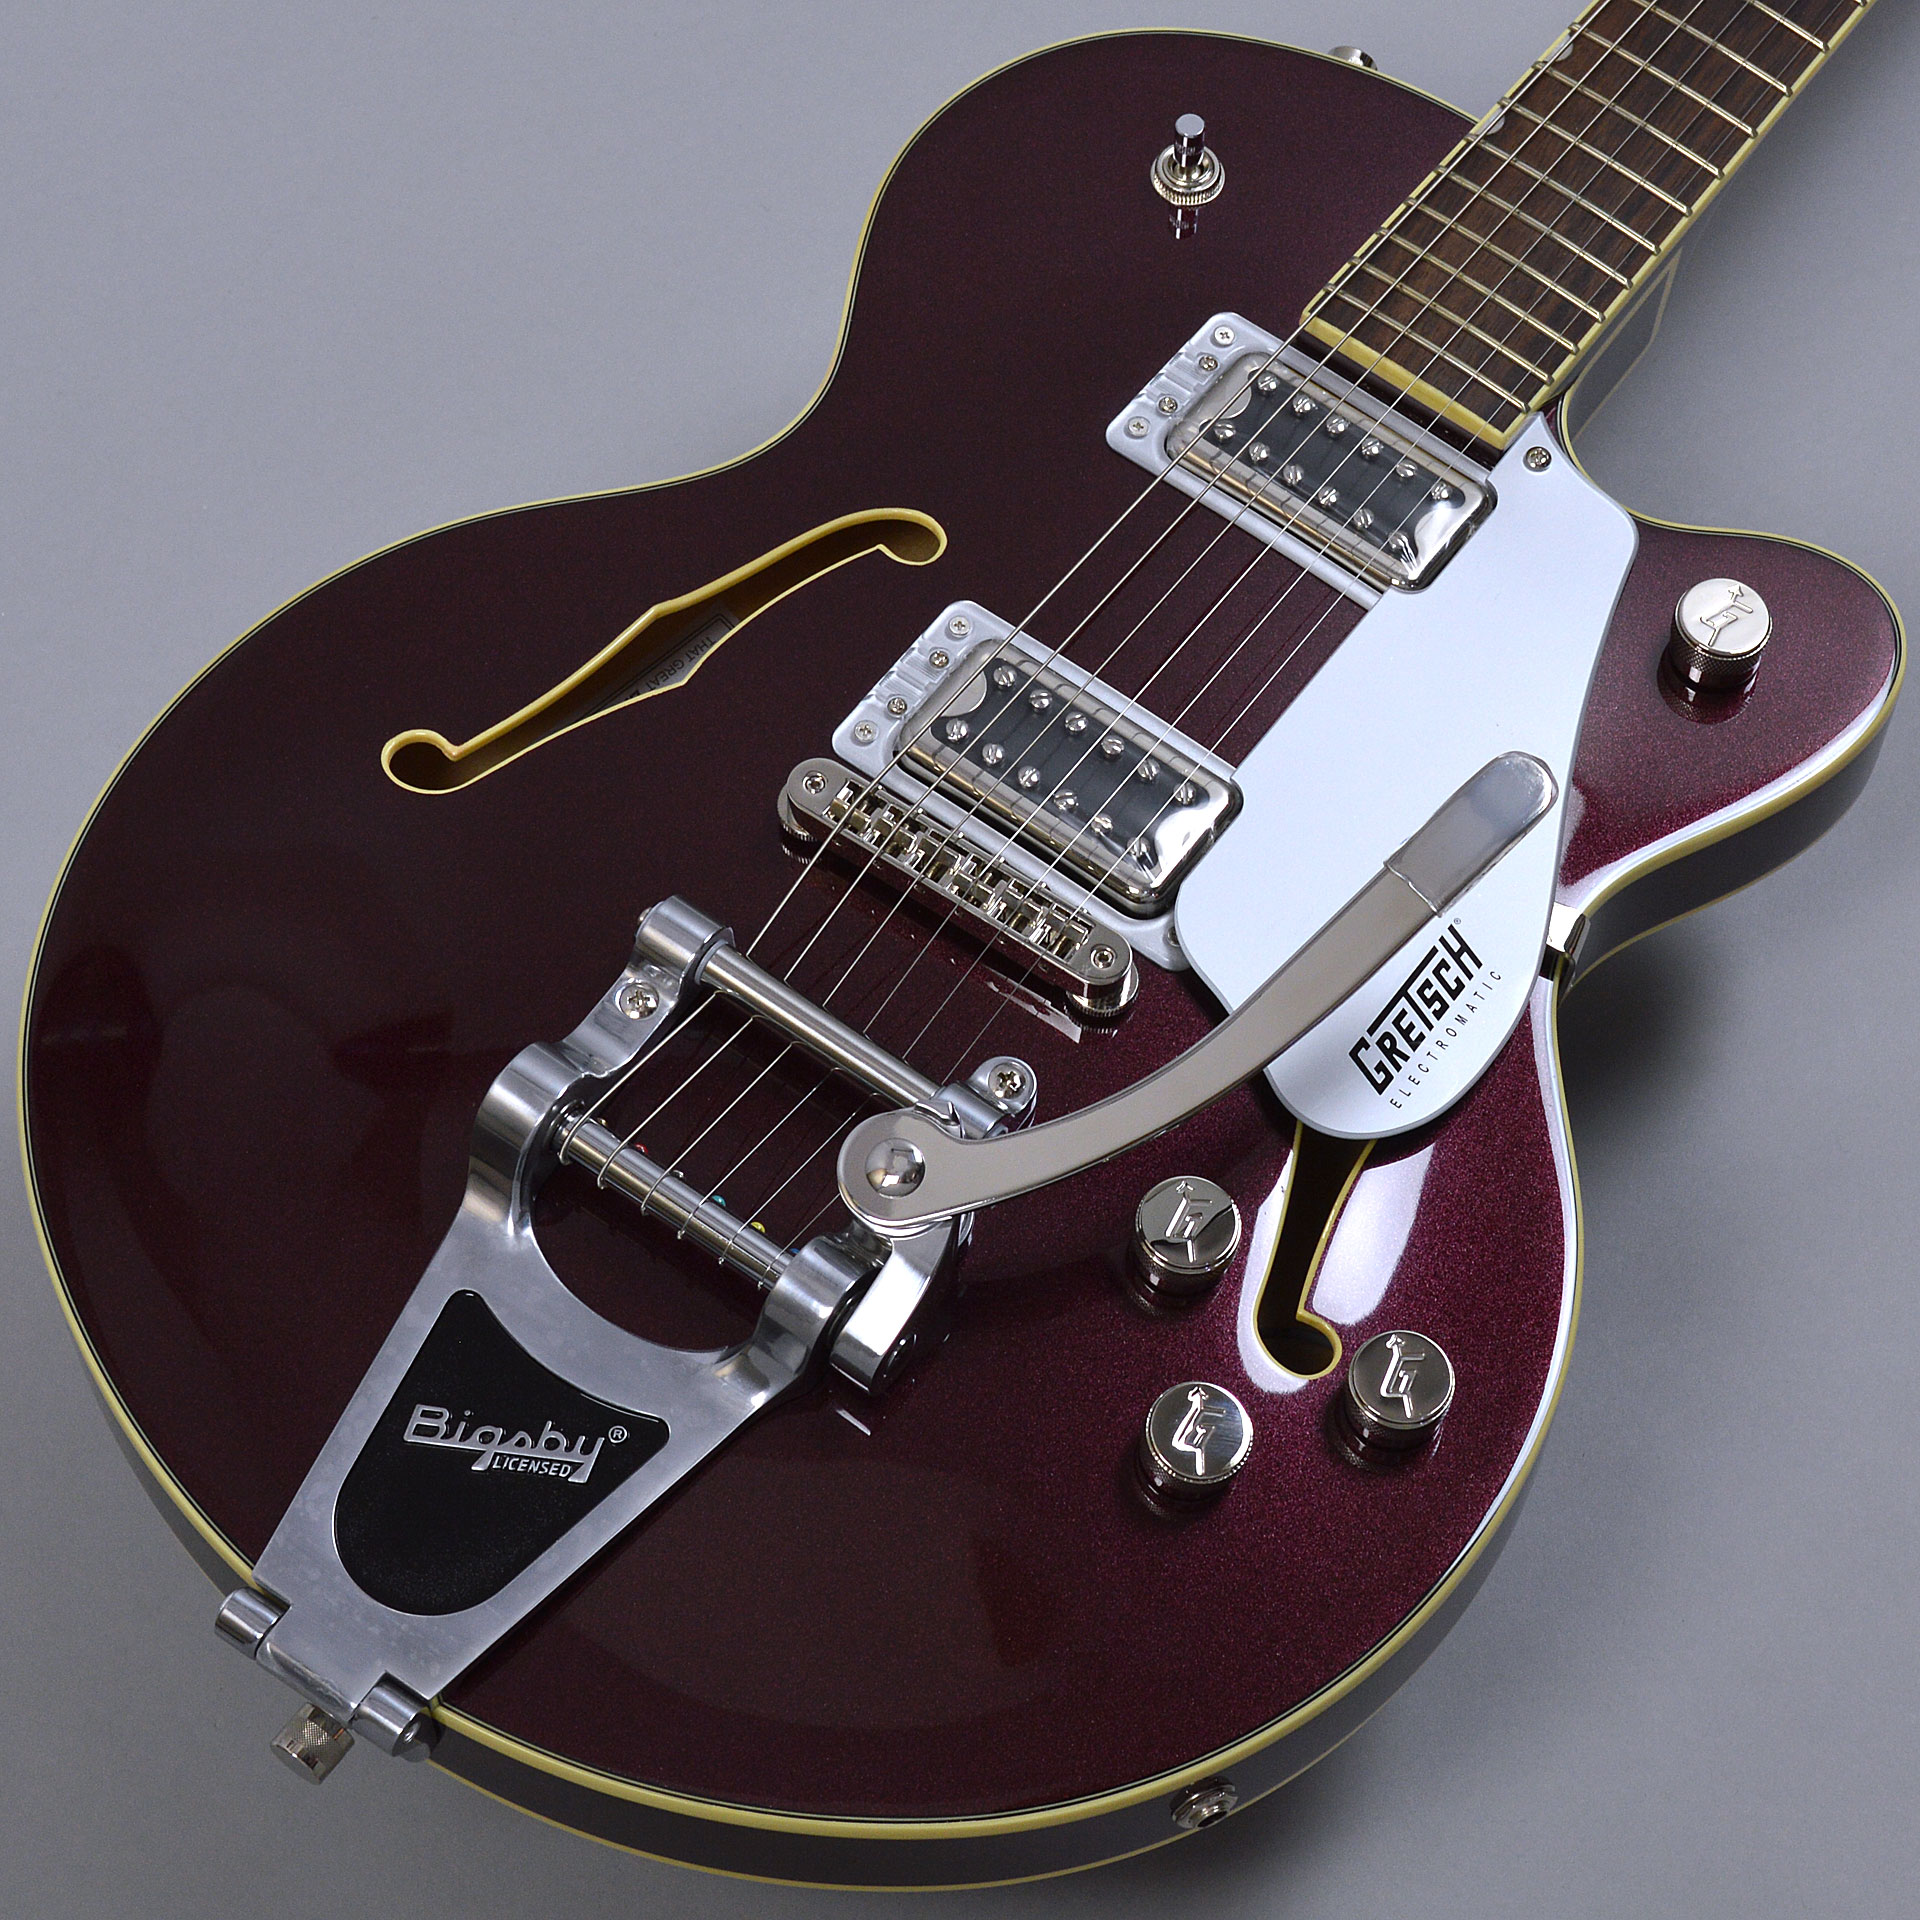 GRETSCH G5655T Electromatic Center Block Jr. Single-Cut with Bigsbyサムネ画像